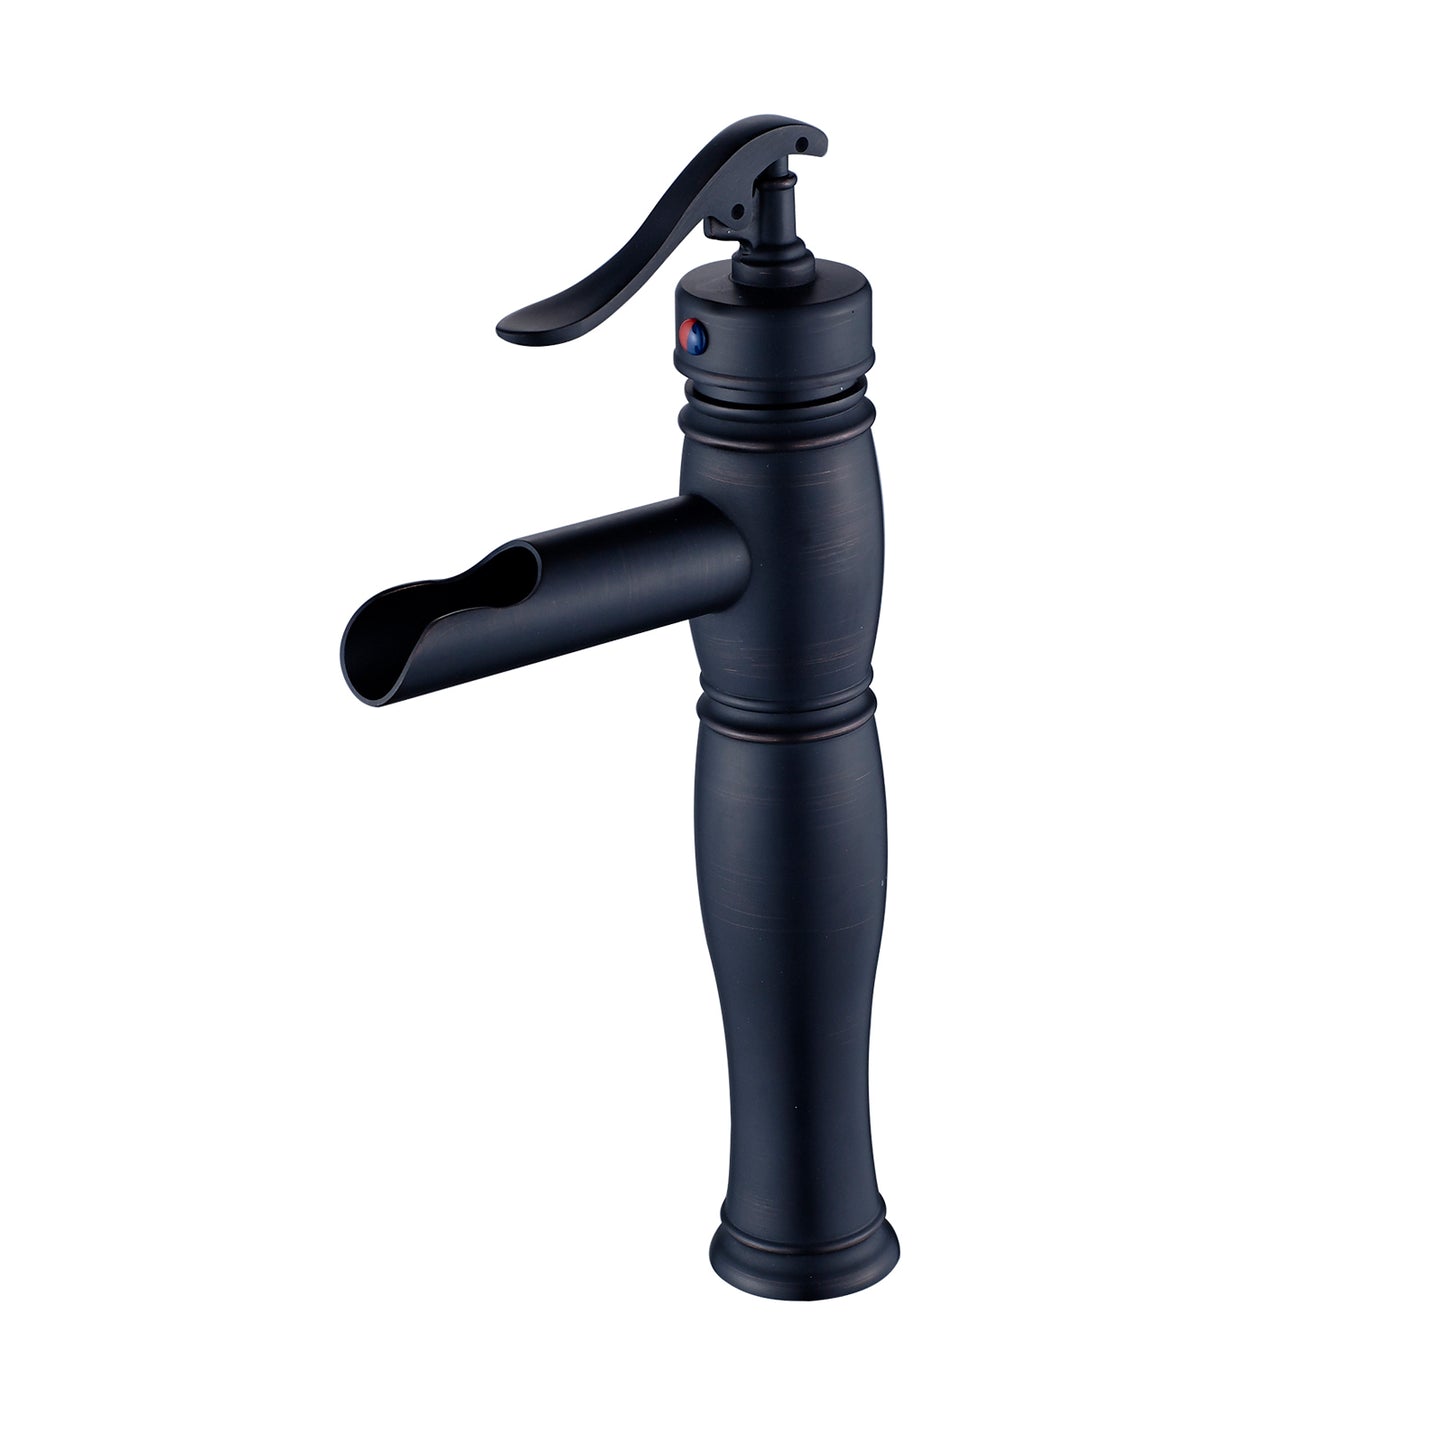 Oil Rubbed Bronze Waterfall Faucet for Bathroom Sink